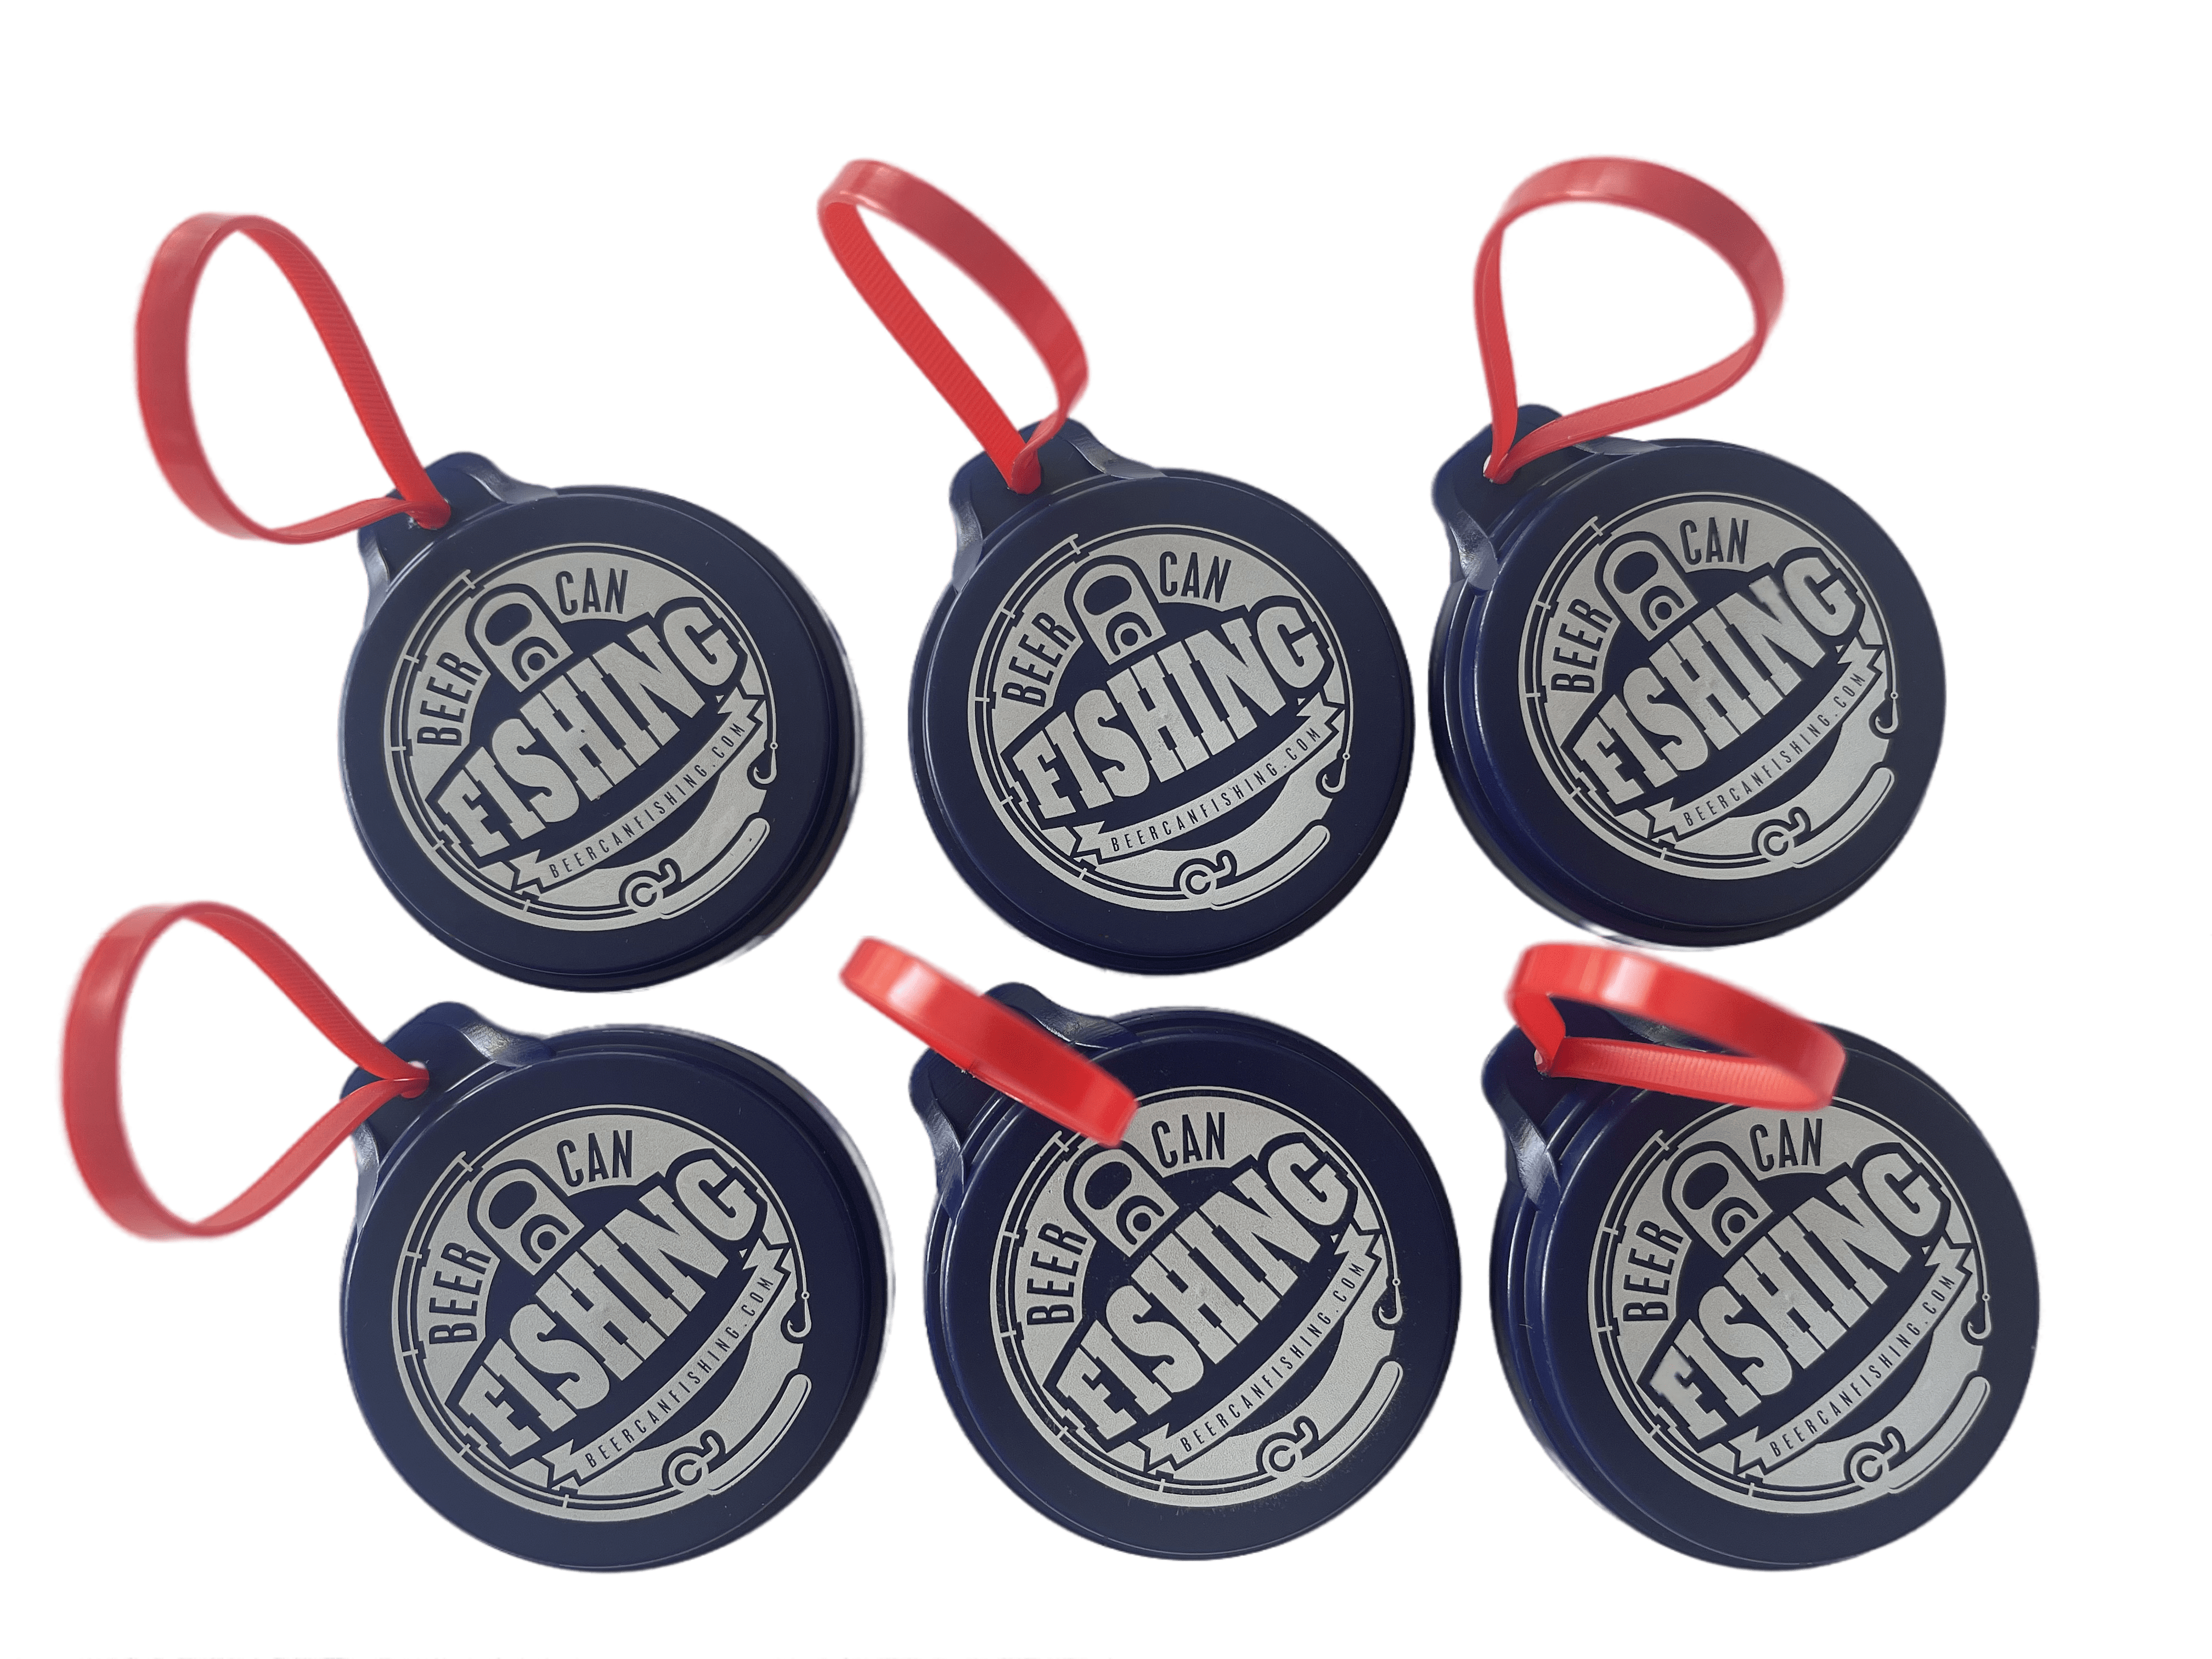 http://beercanfishing.com/cdn/shop/files/6-pack-beer-can-lids.png?v=1690738215